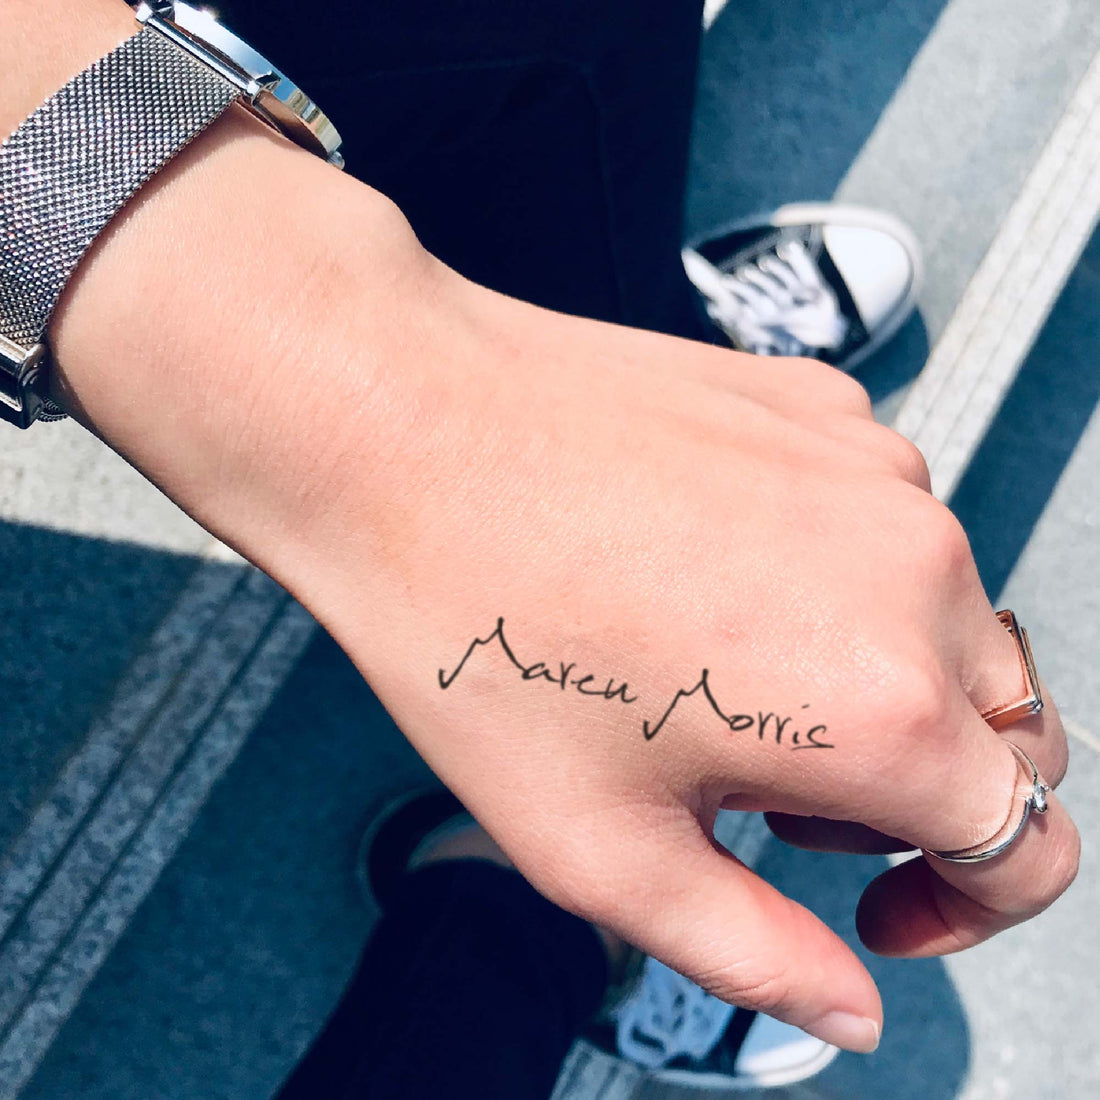 Maren Morris custom temporary tattoo sticker design idea inspiration meanings removal arm wrist hand words font name signature calligraphy lyrics tour concert outfits merch accessory gift souvenir costumes wear dress up code